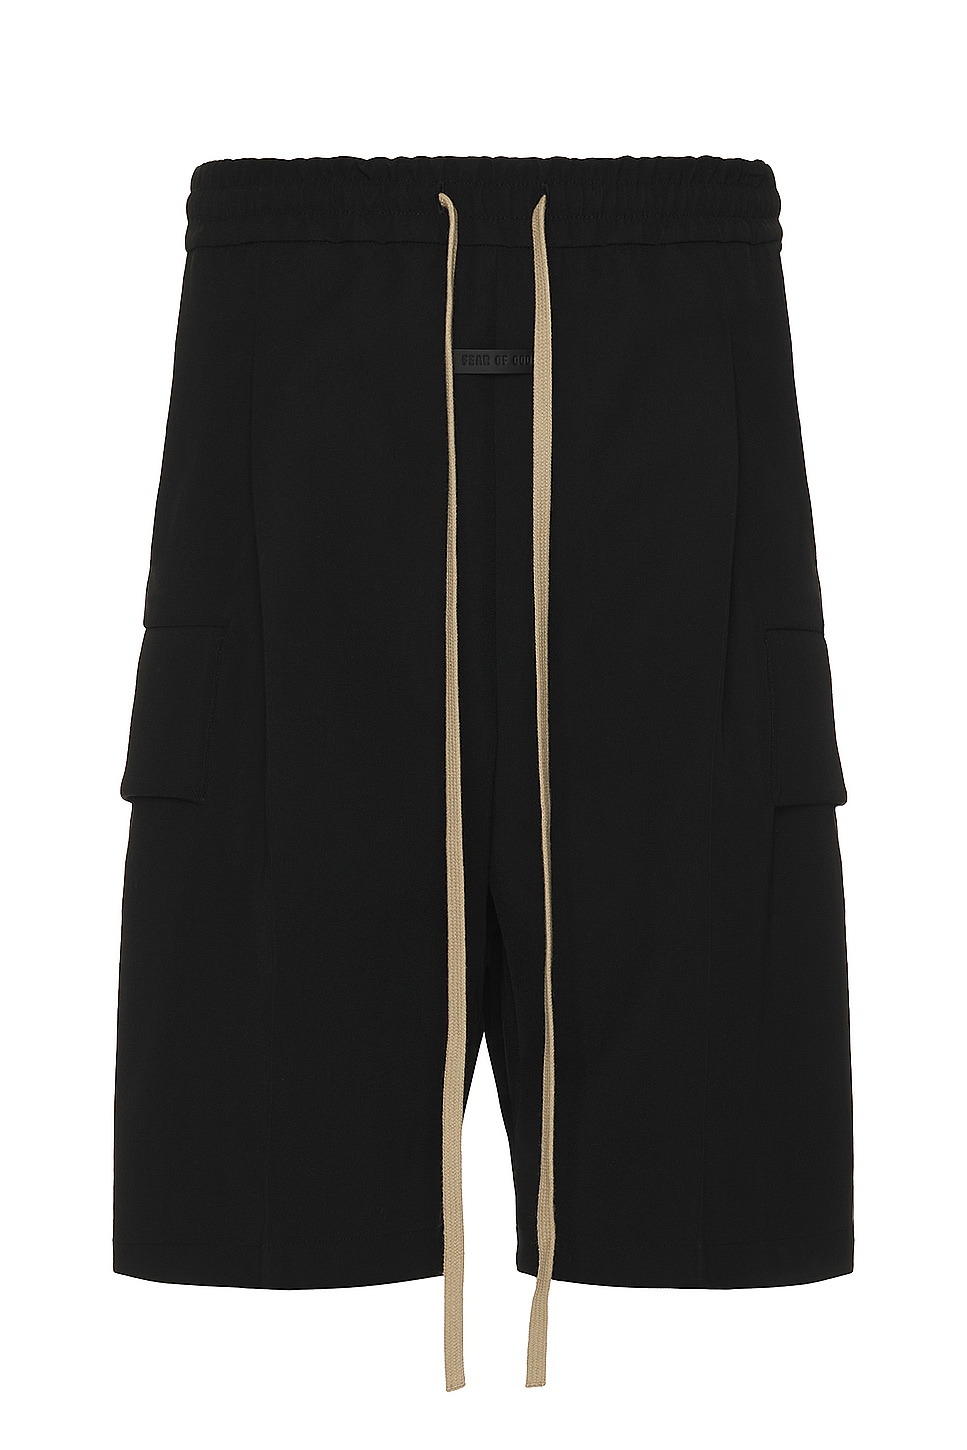 Image 1 of Fear of God Wool Cotton Cargo Short in Black